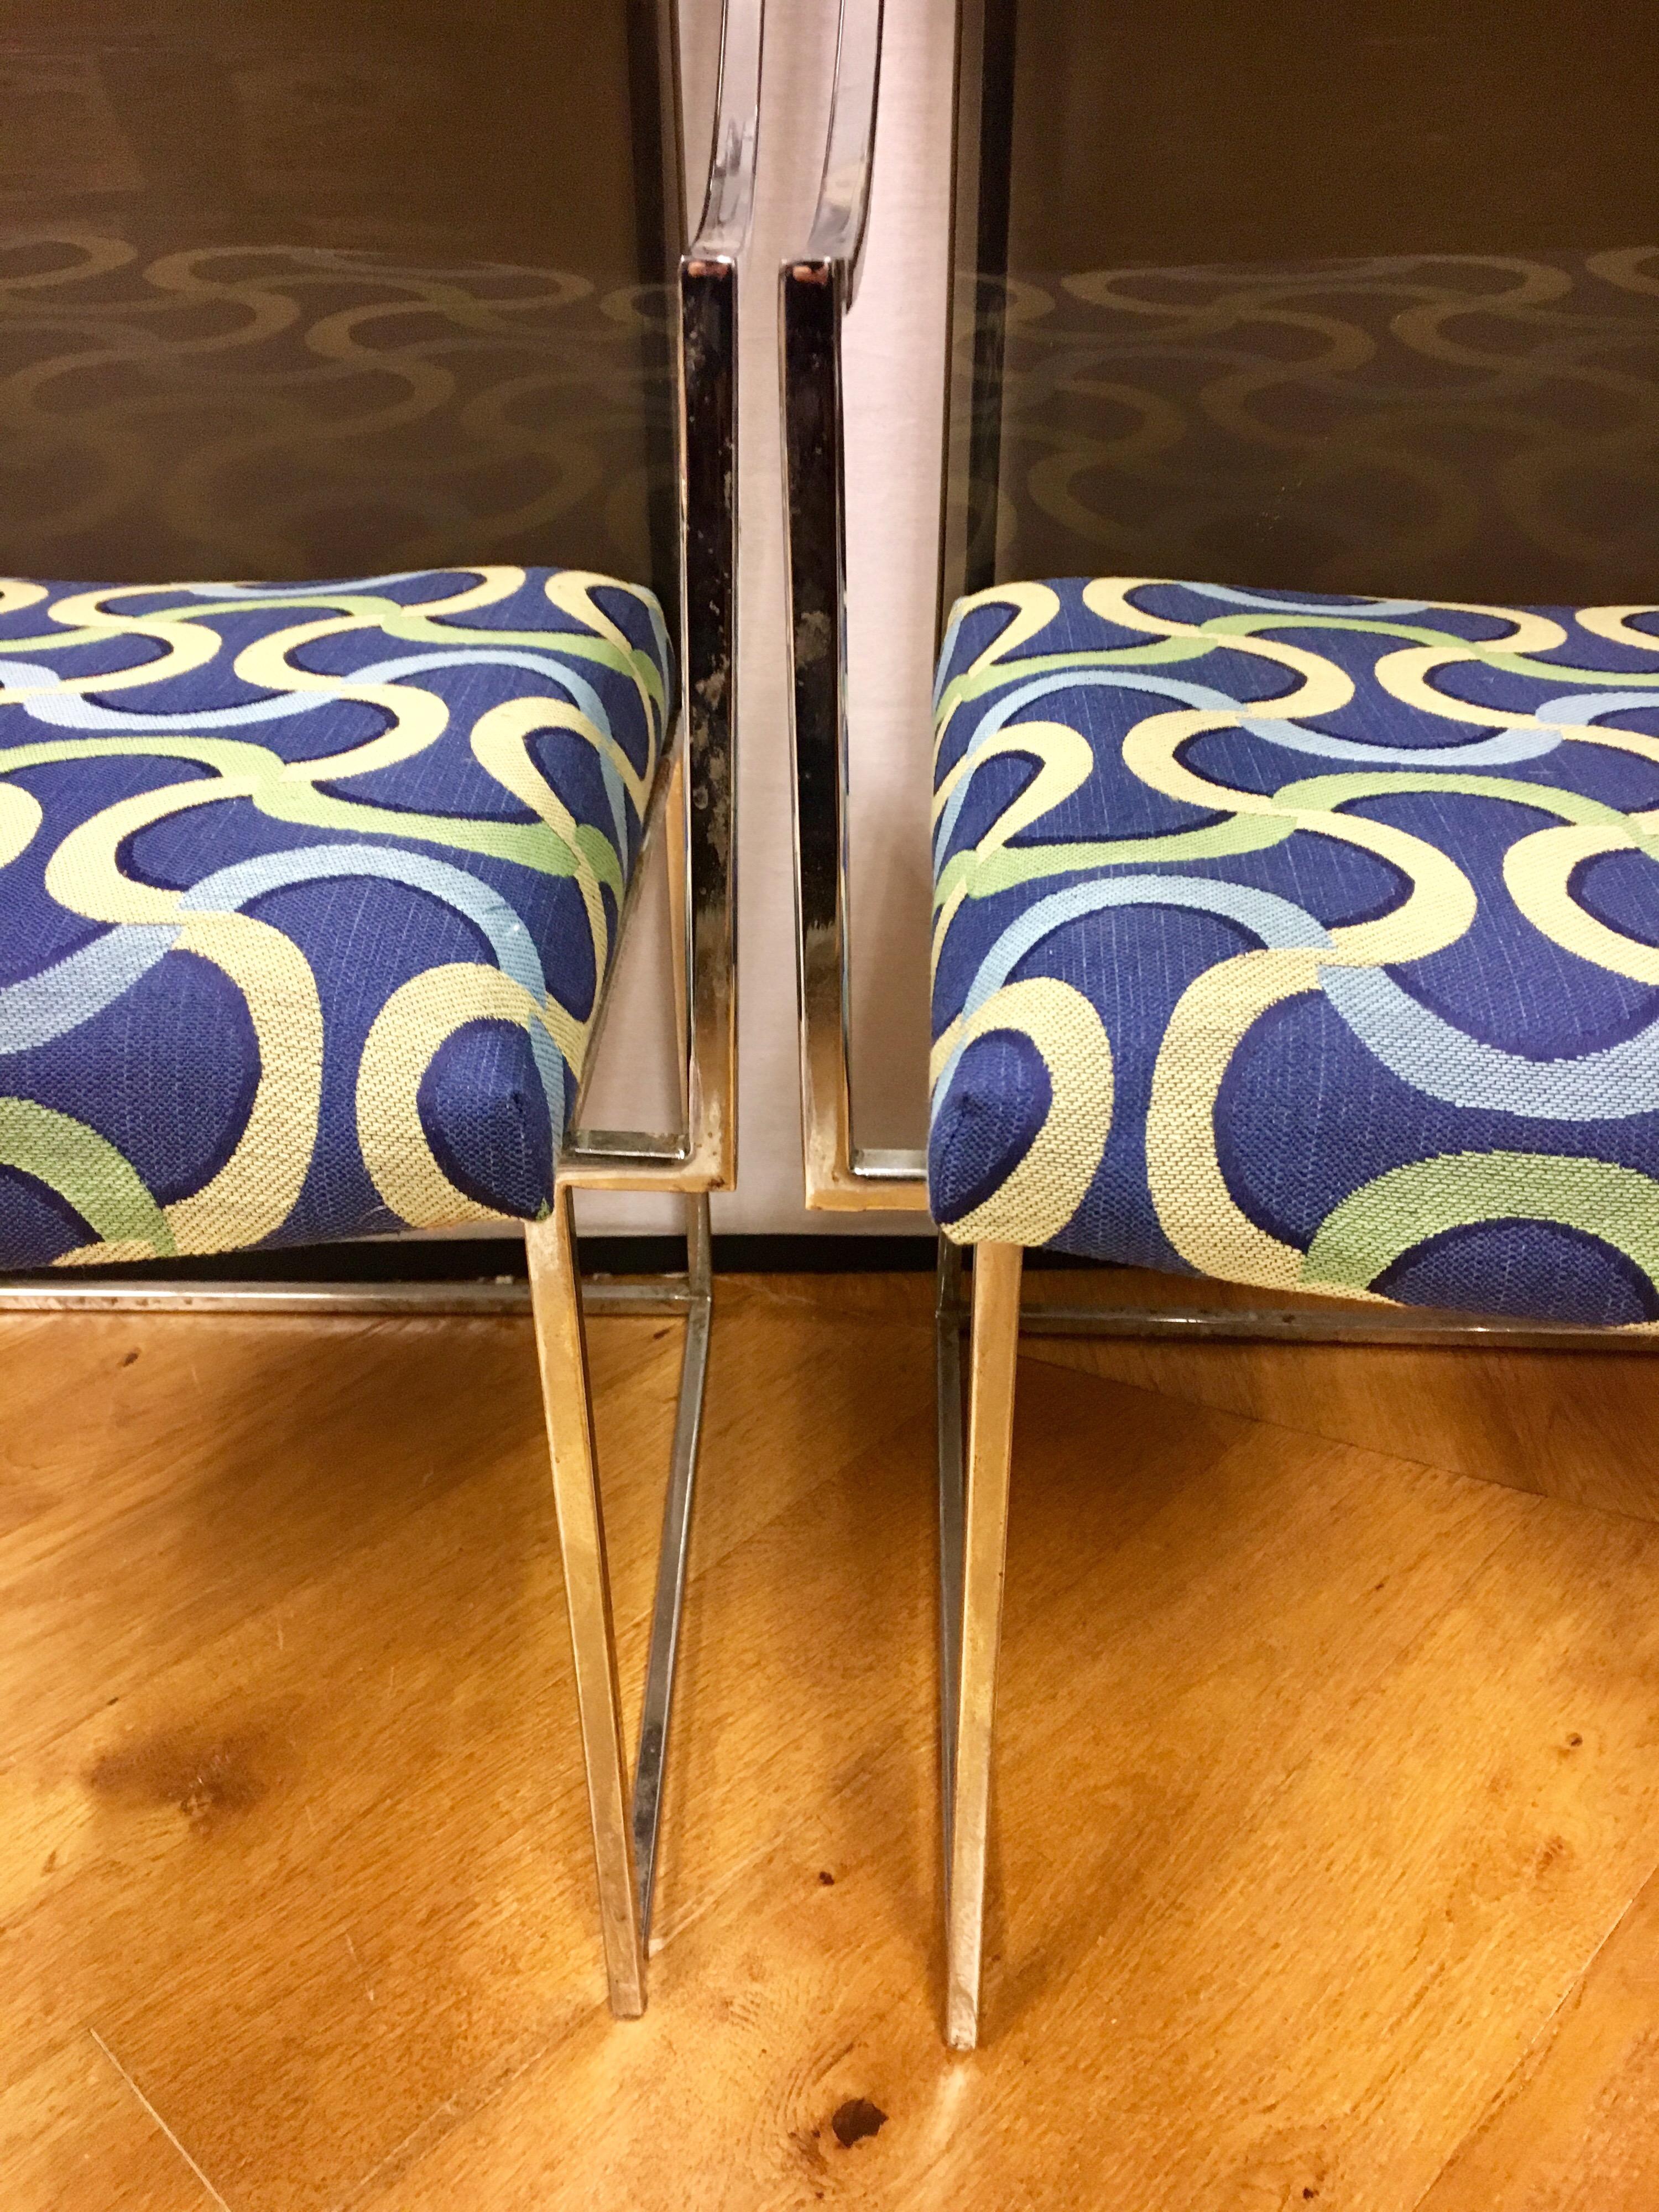 Pair of chrome and lucite Milo Baughman arm chairs with new Knoll fabric on seat.